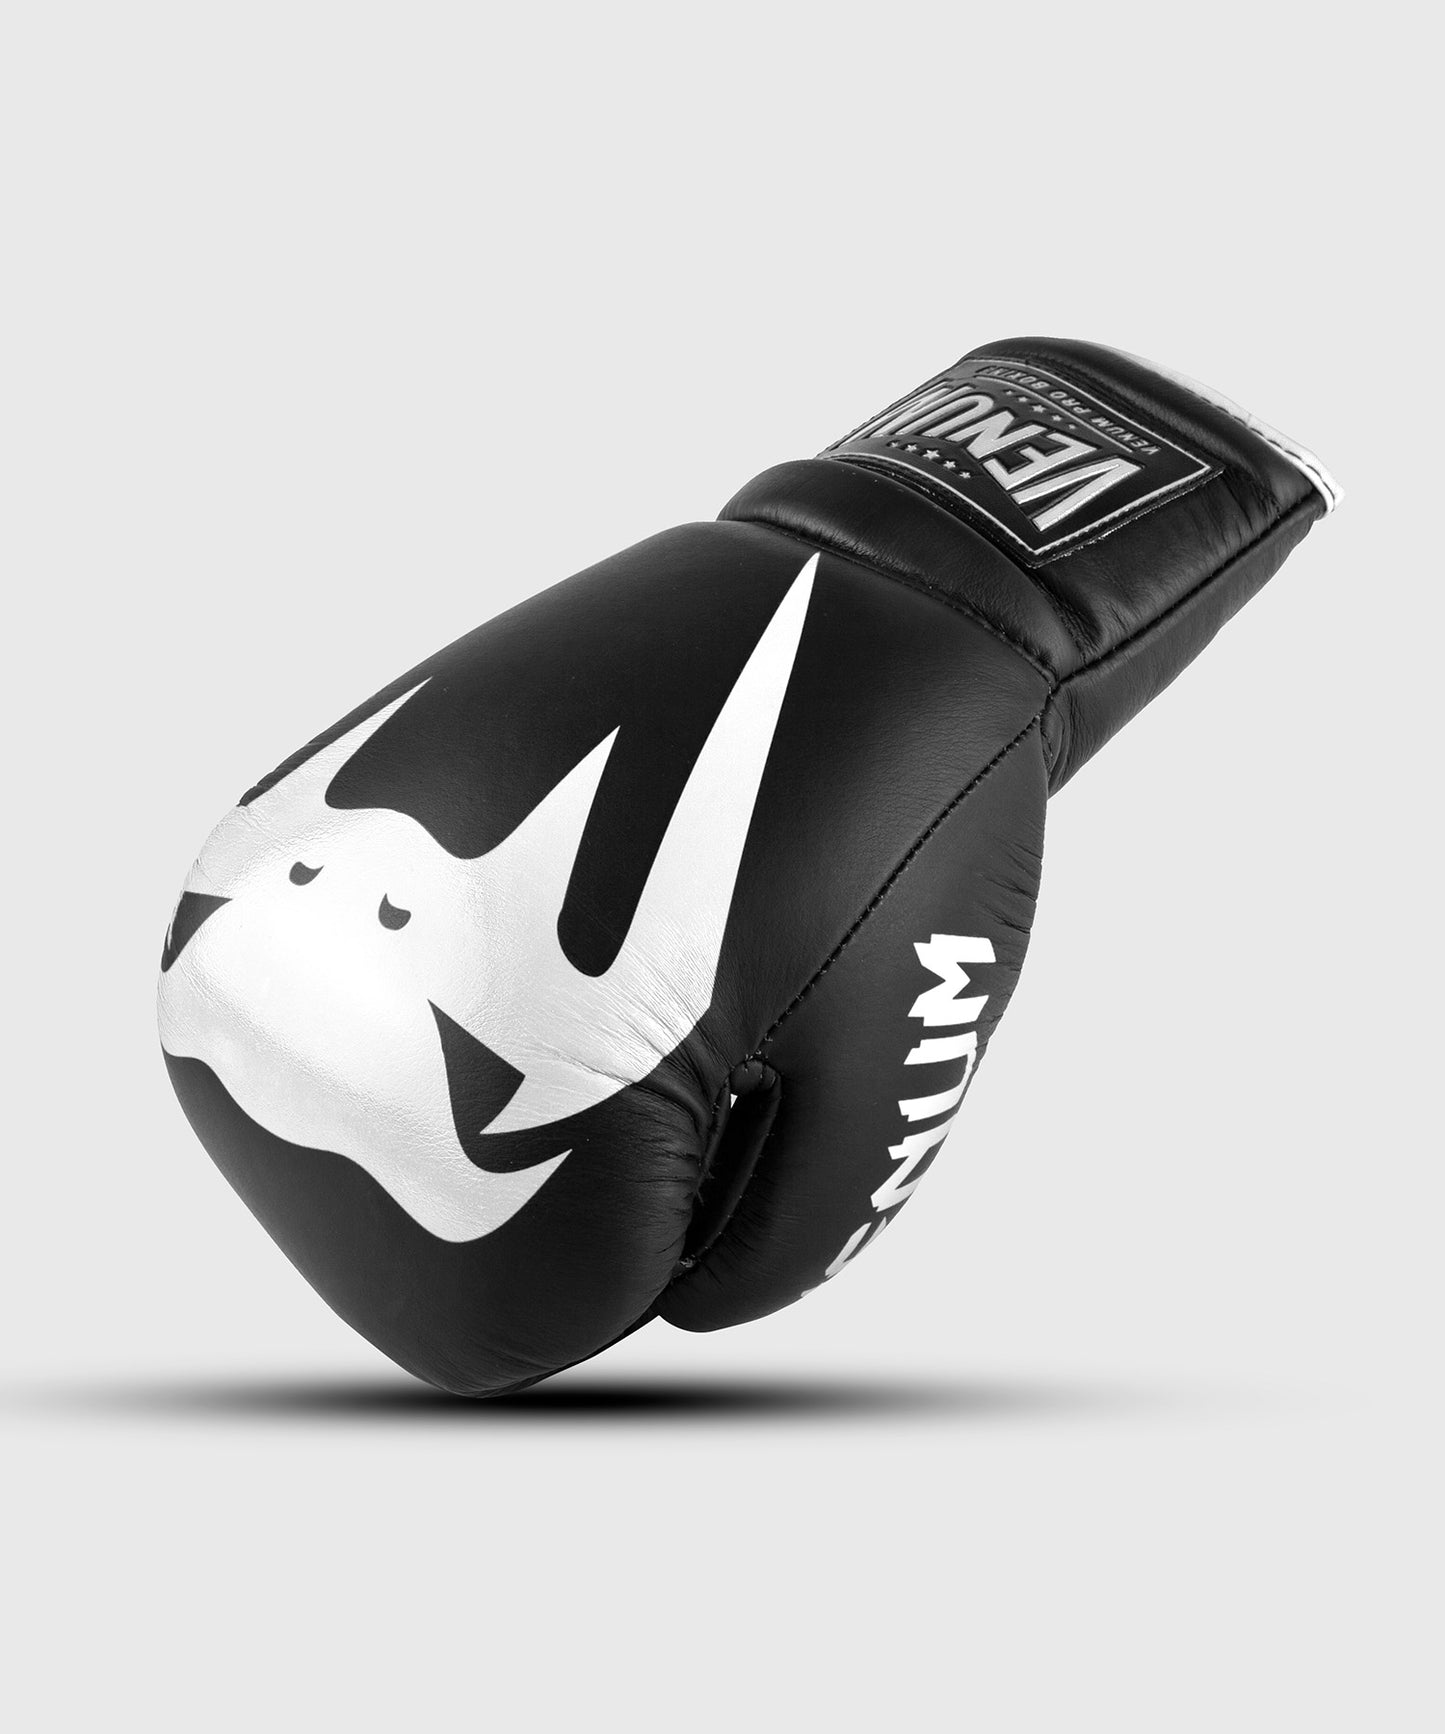 Venum Giant 2.0 Pro Boxing Gloves - With Laces - Negro/Blanco